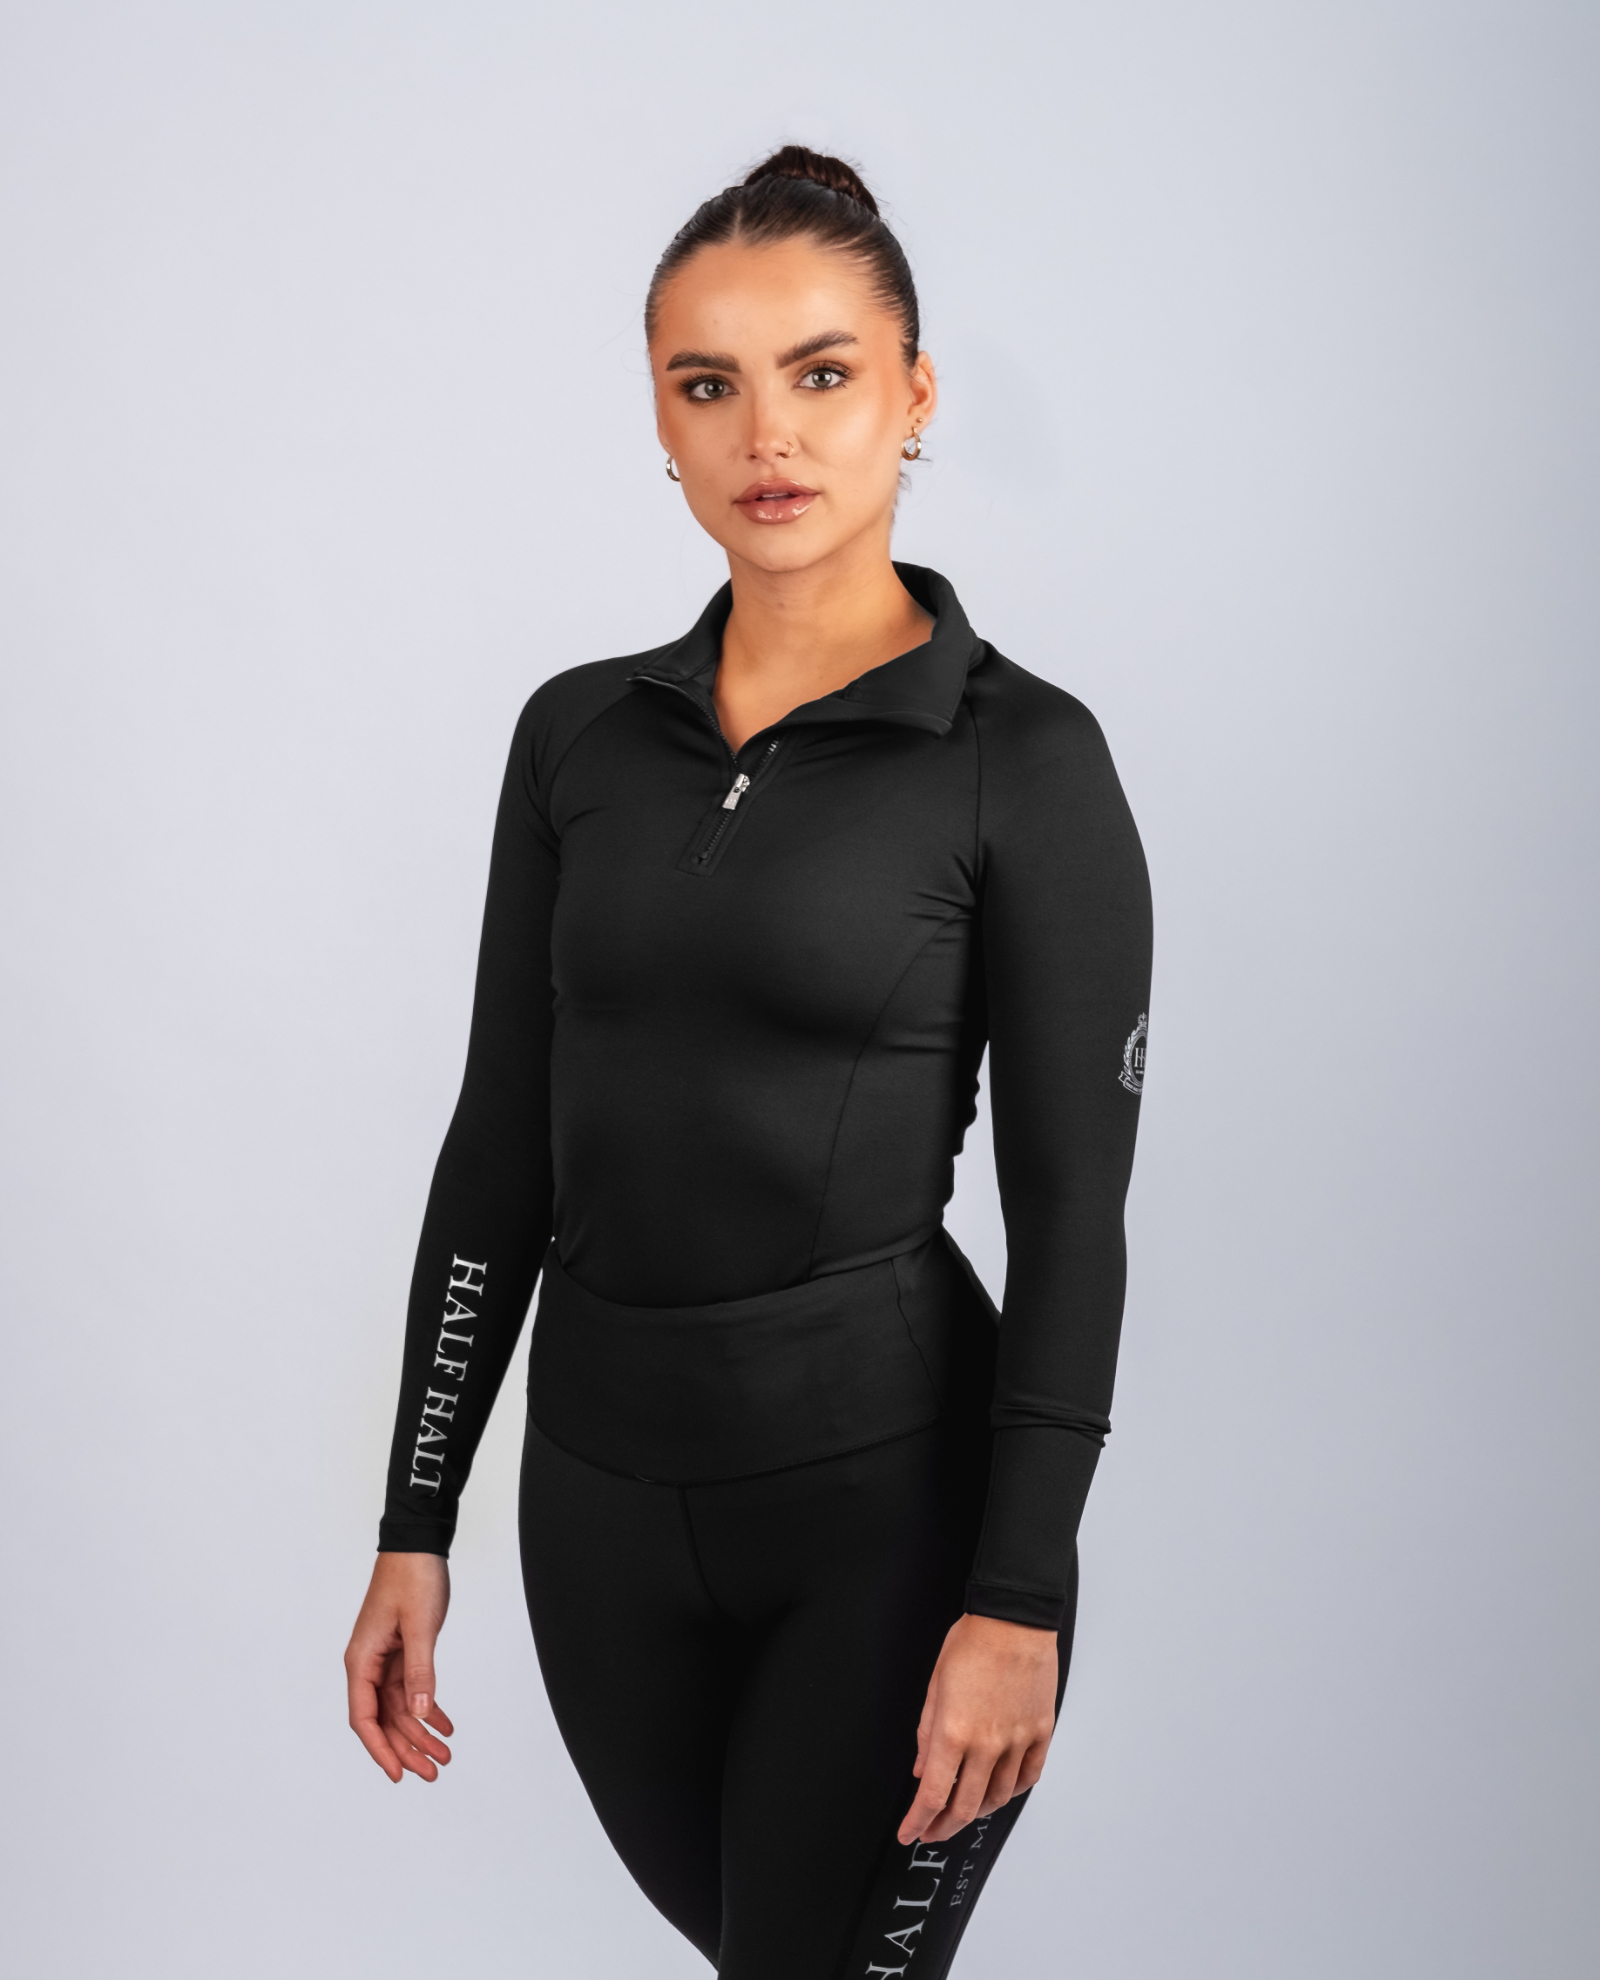 How We Tested Base Layers for Women - GearLab